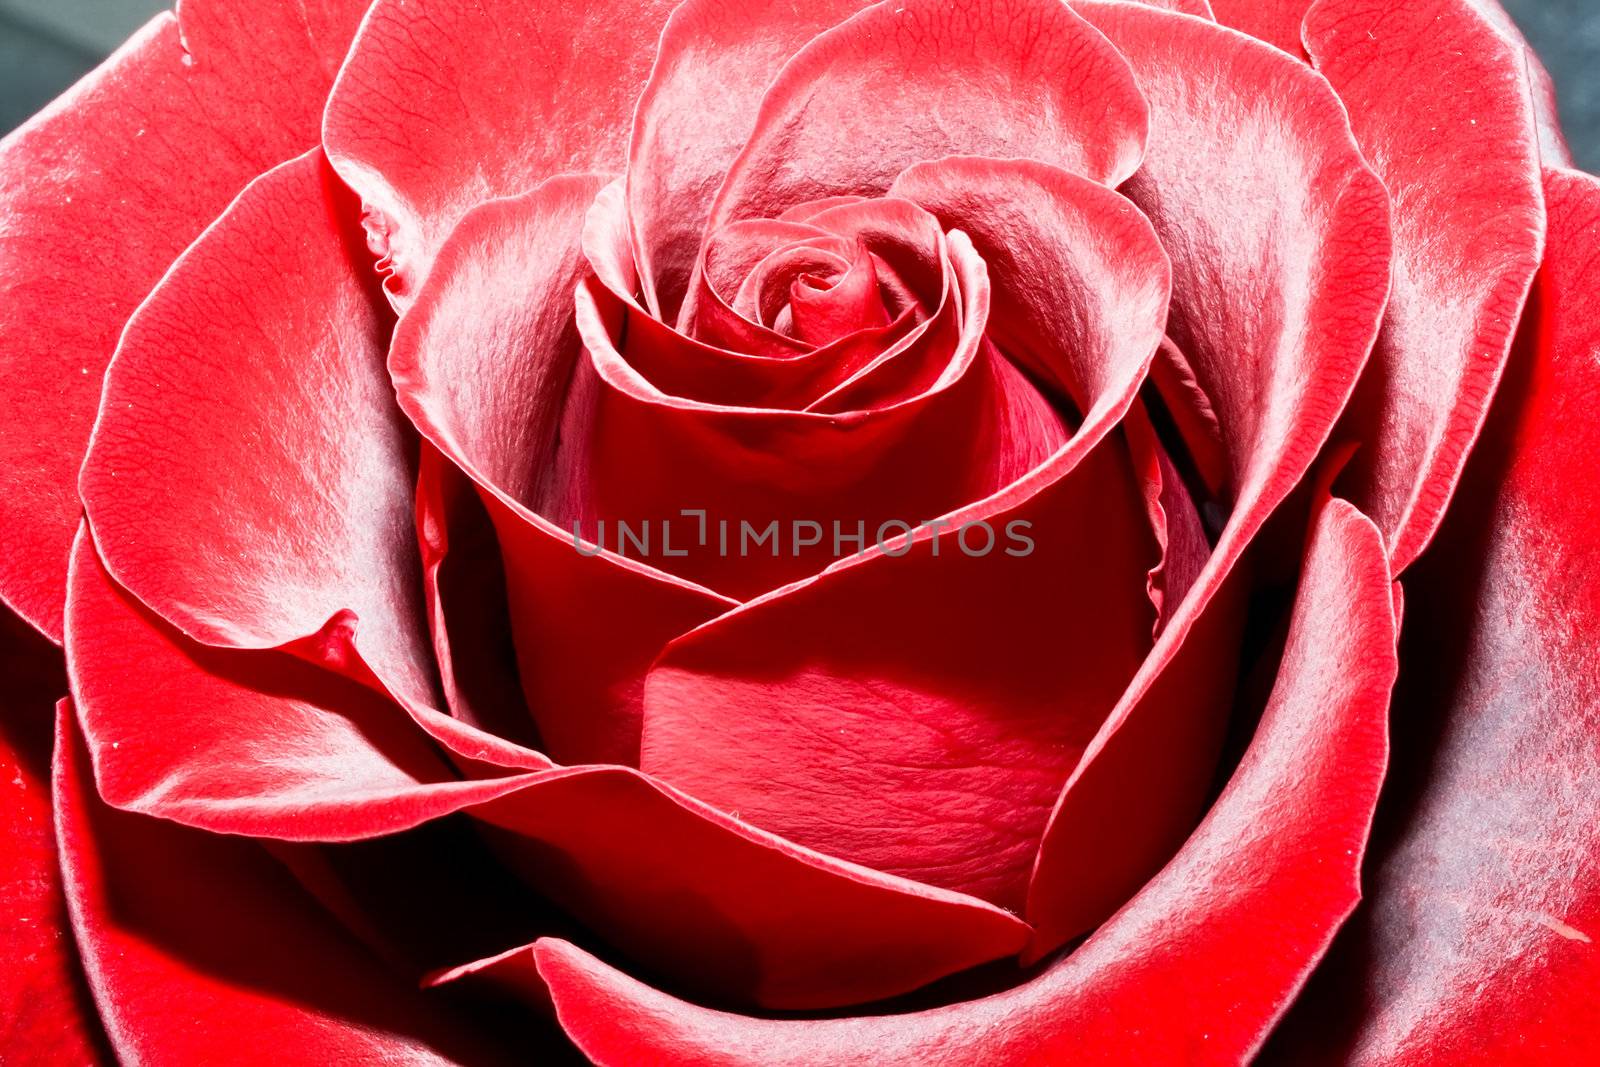 Lush and beautiful red rose, high quality macro